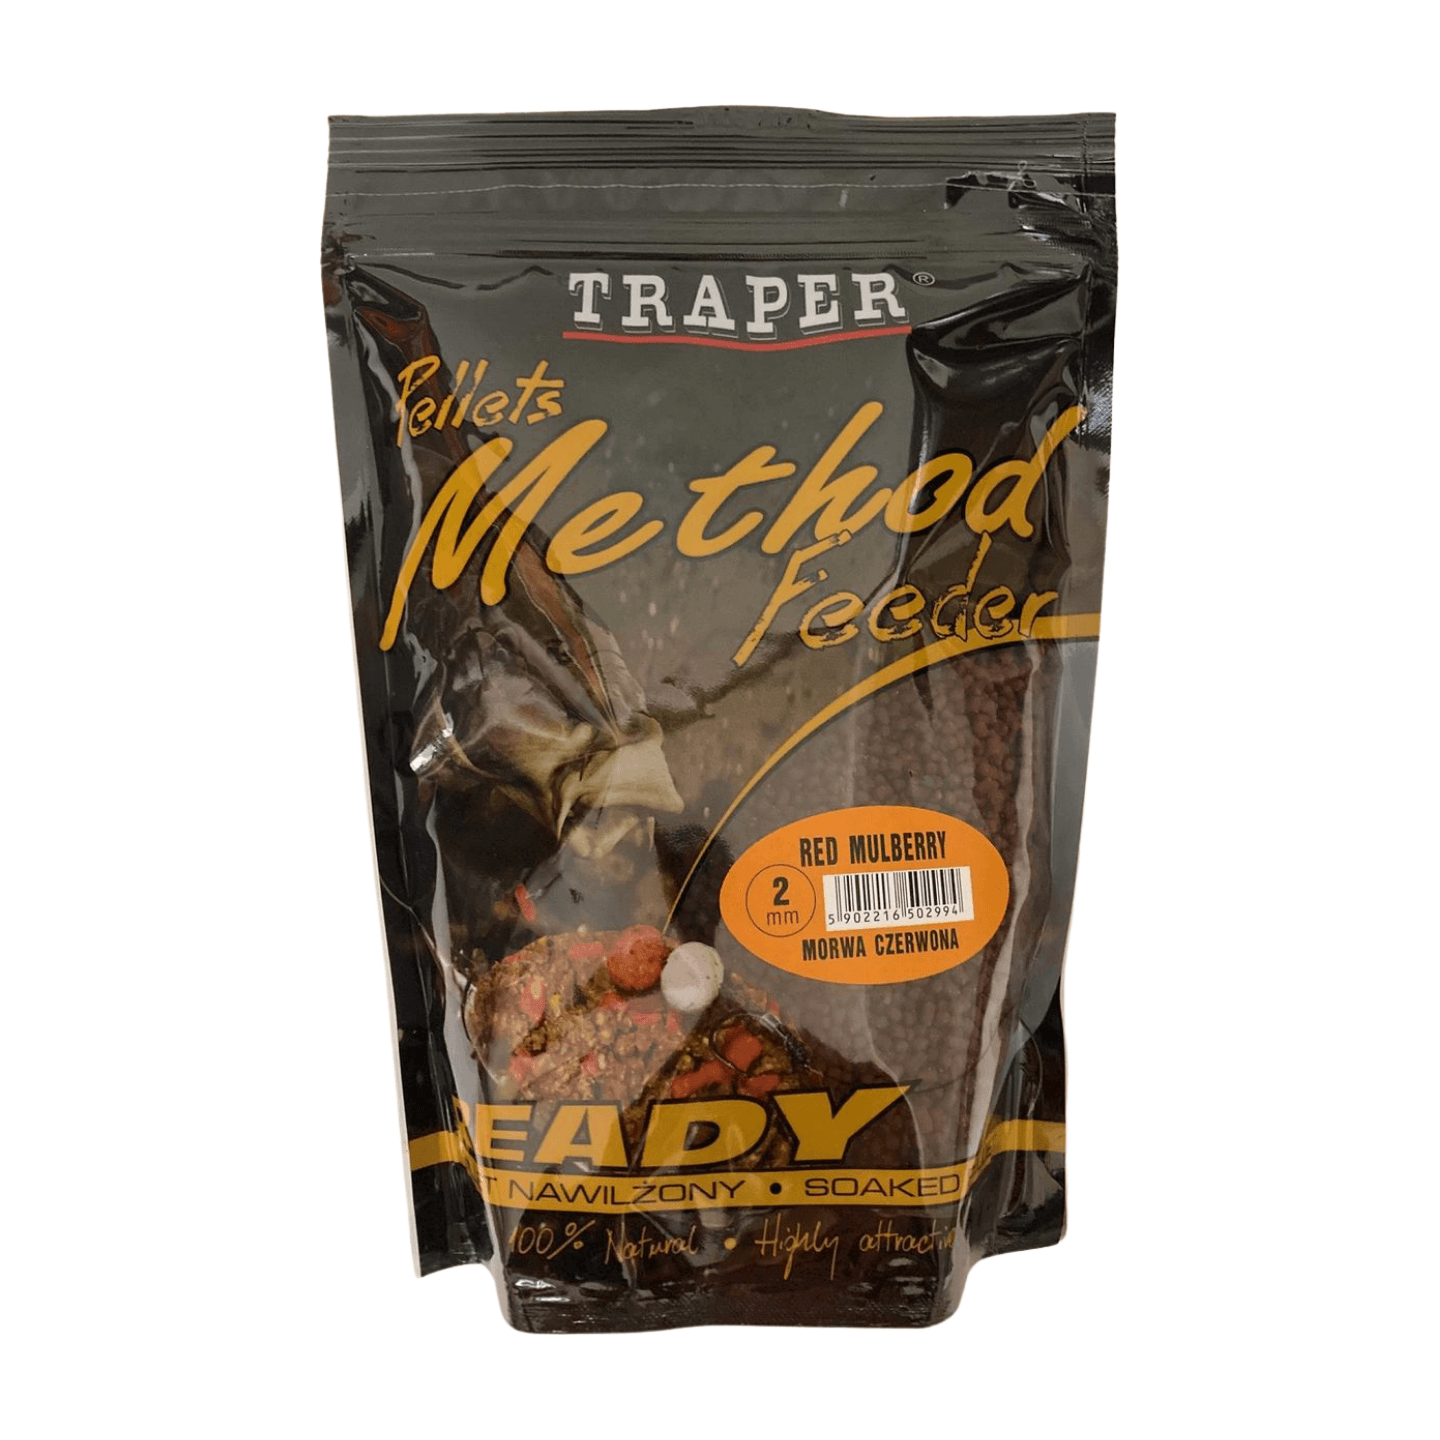 Selected image for TRAPER MF Ready Pelet, Crveni dud, 2mm/500g